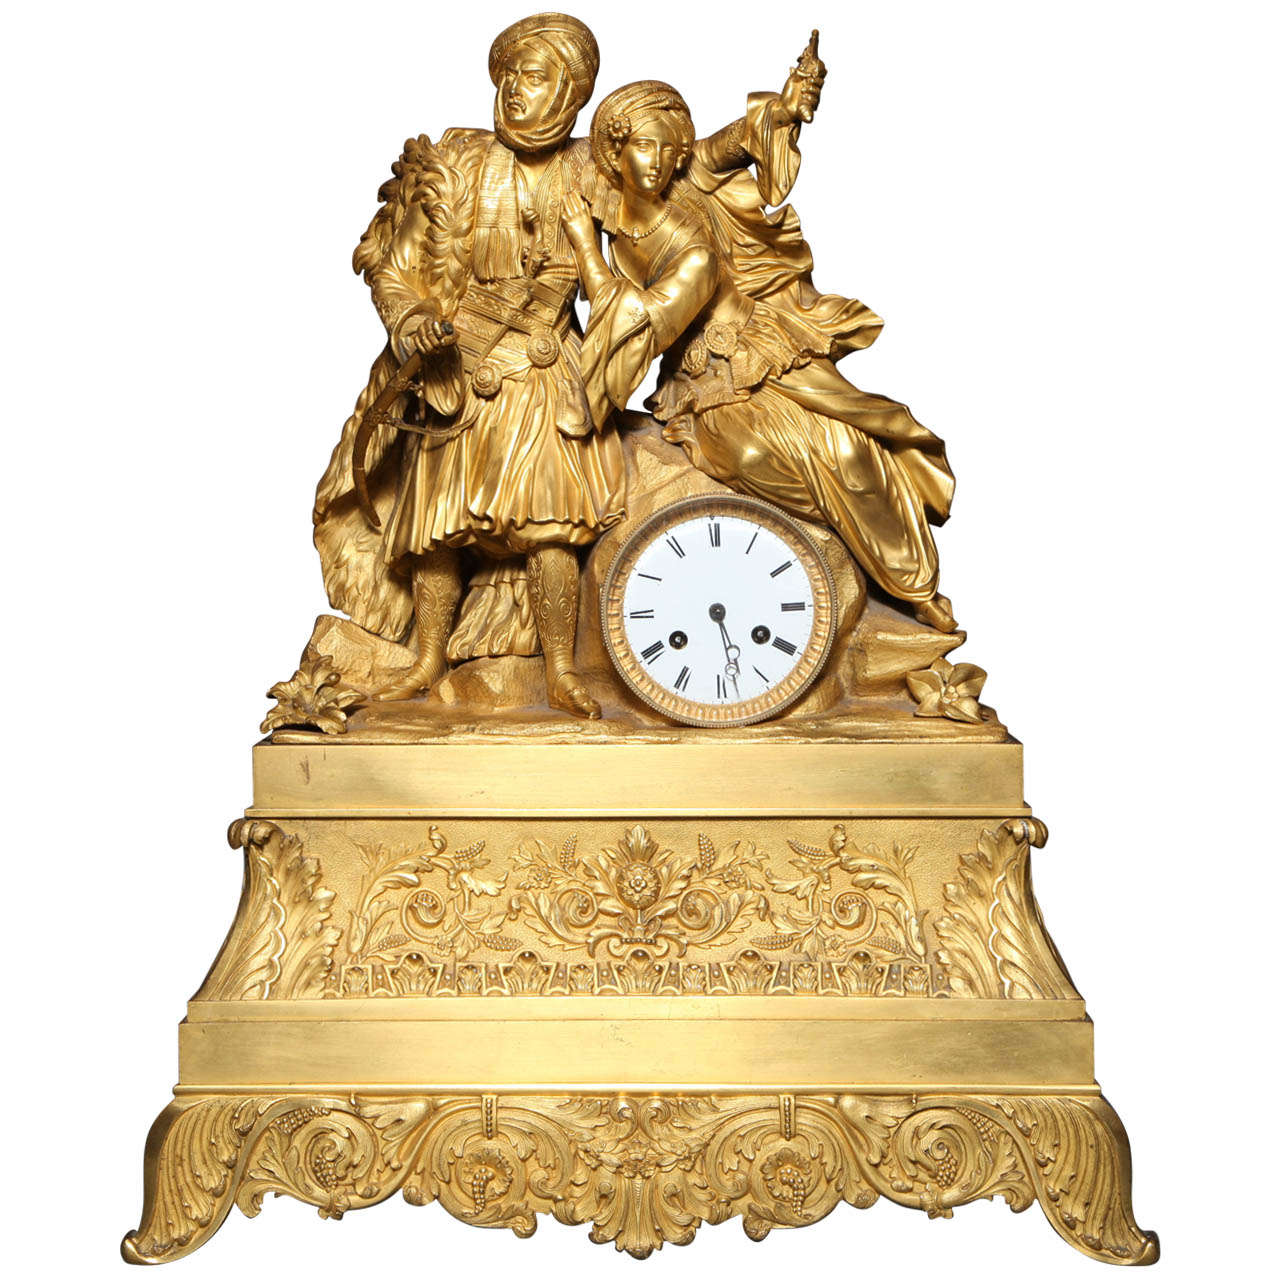 Gilt Bronze Clock with Arab Prince and Princess made for the Orientalist market